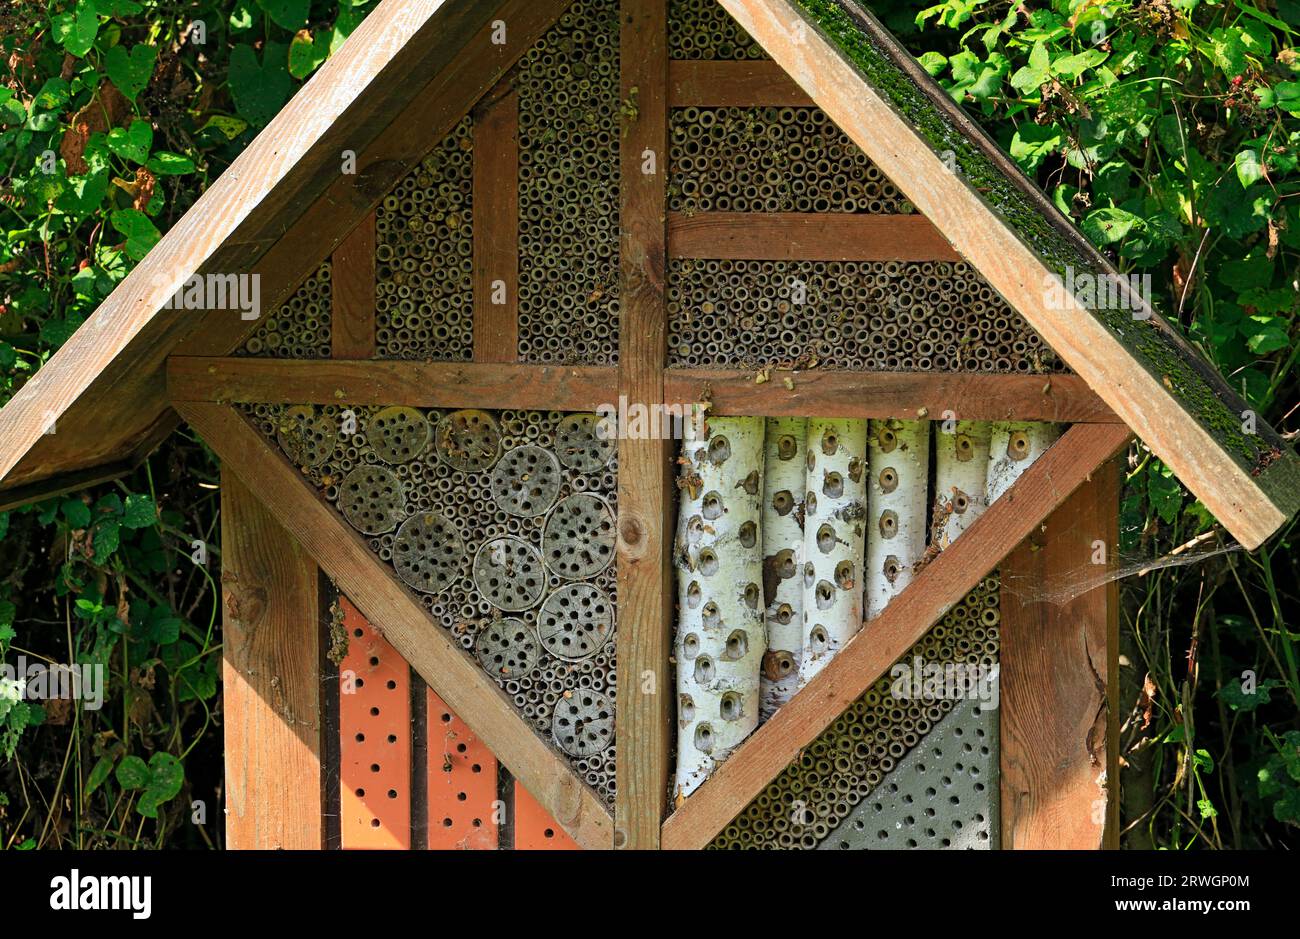 Bee Box, Cosmeston Lakes and Country Park, Penarth, Vale of Glamorgan, South Wales, Großbritannien. Stockfoto